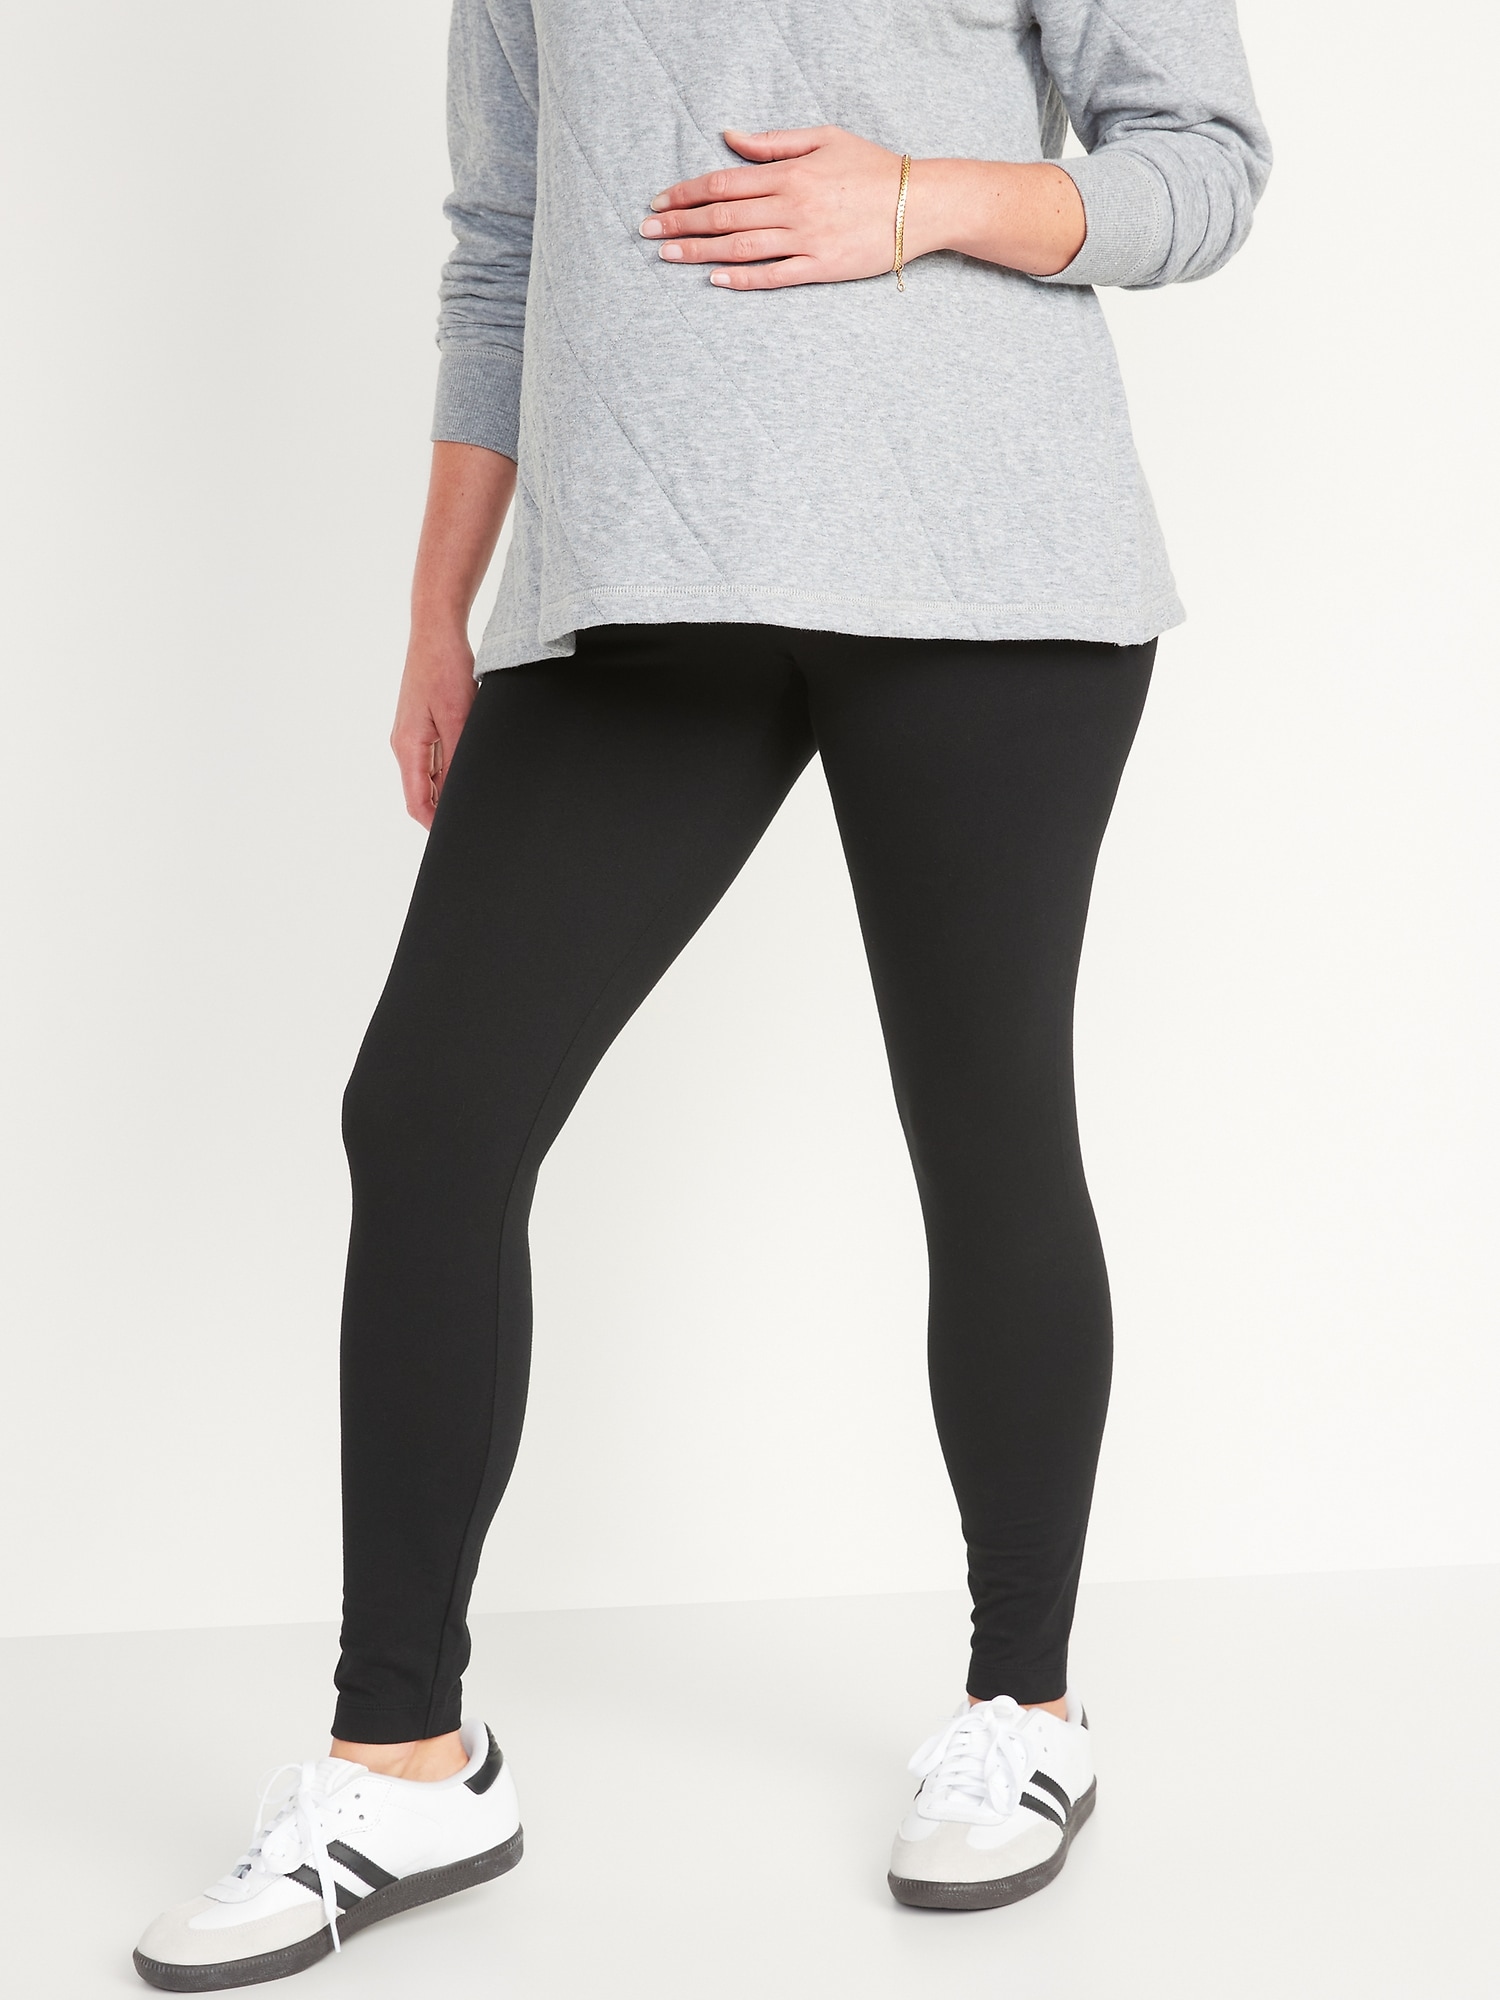 Pack of 2 Leggings in Stretch Jersey Knit for Maternity - black